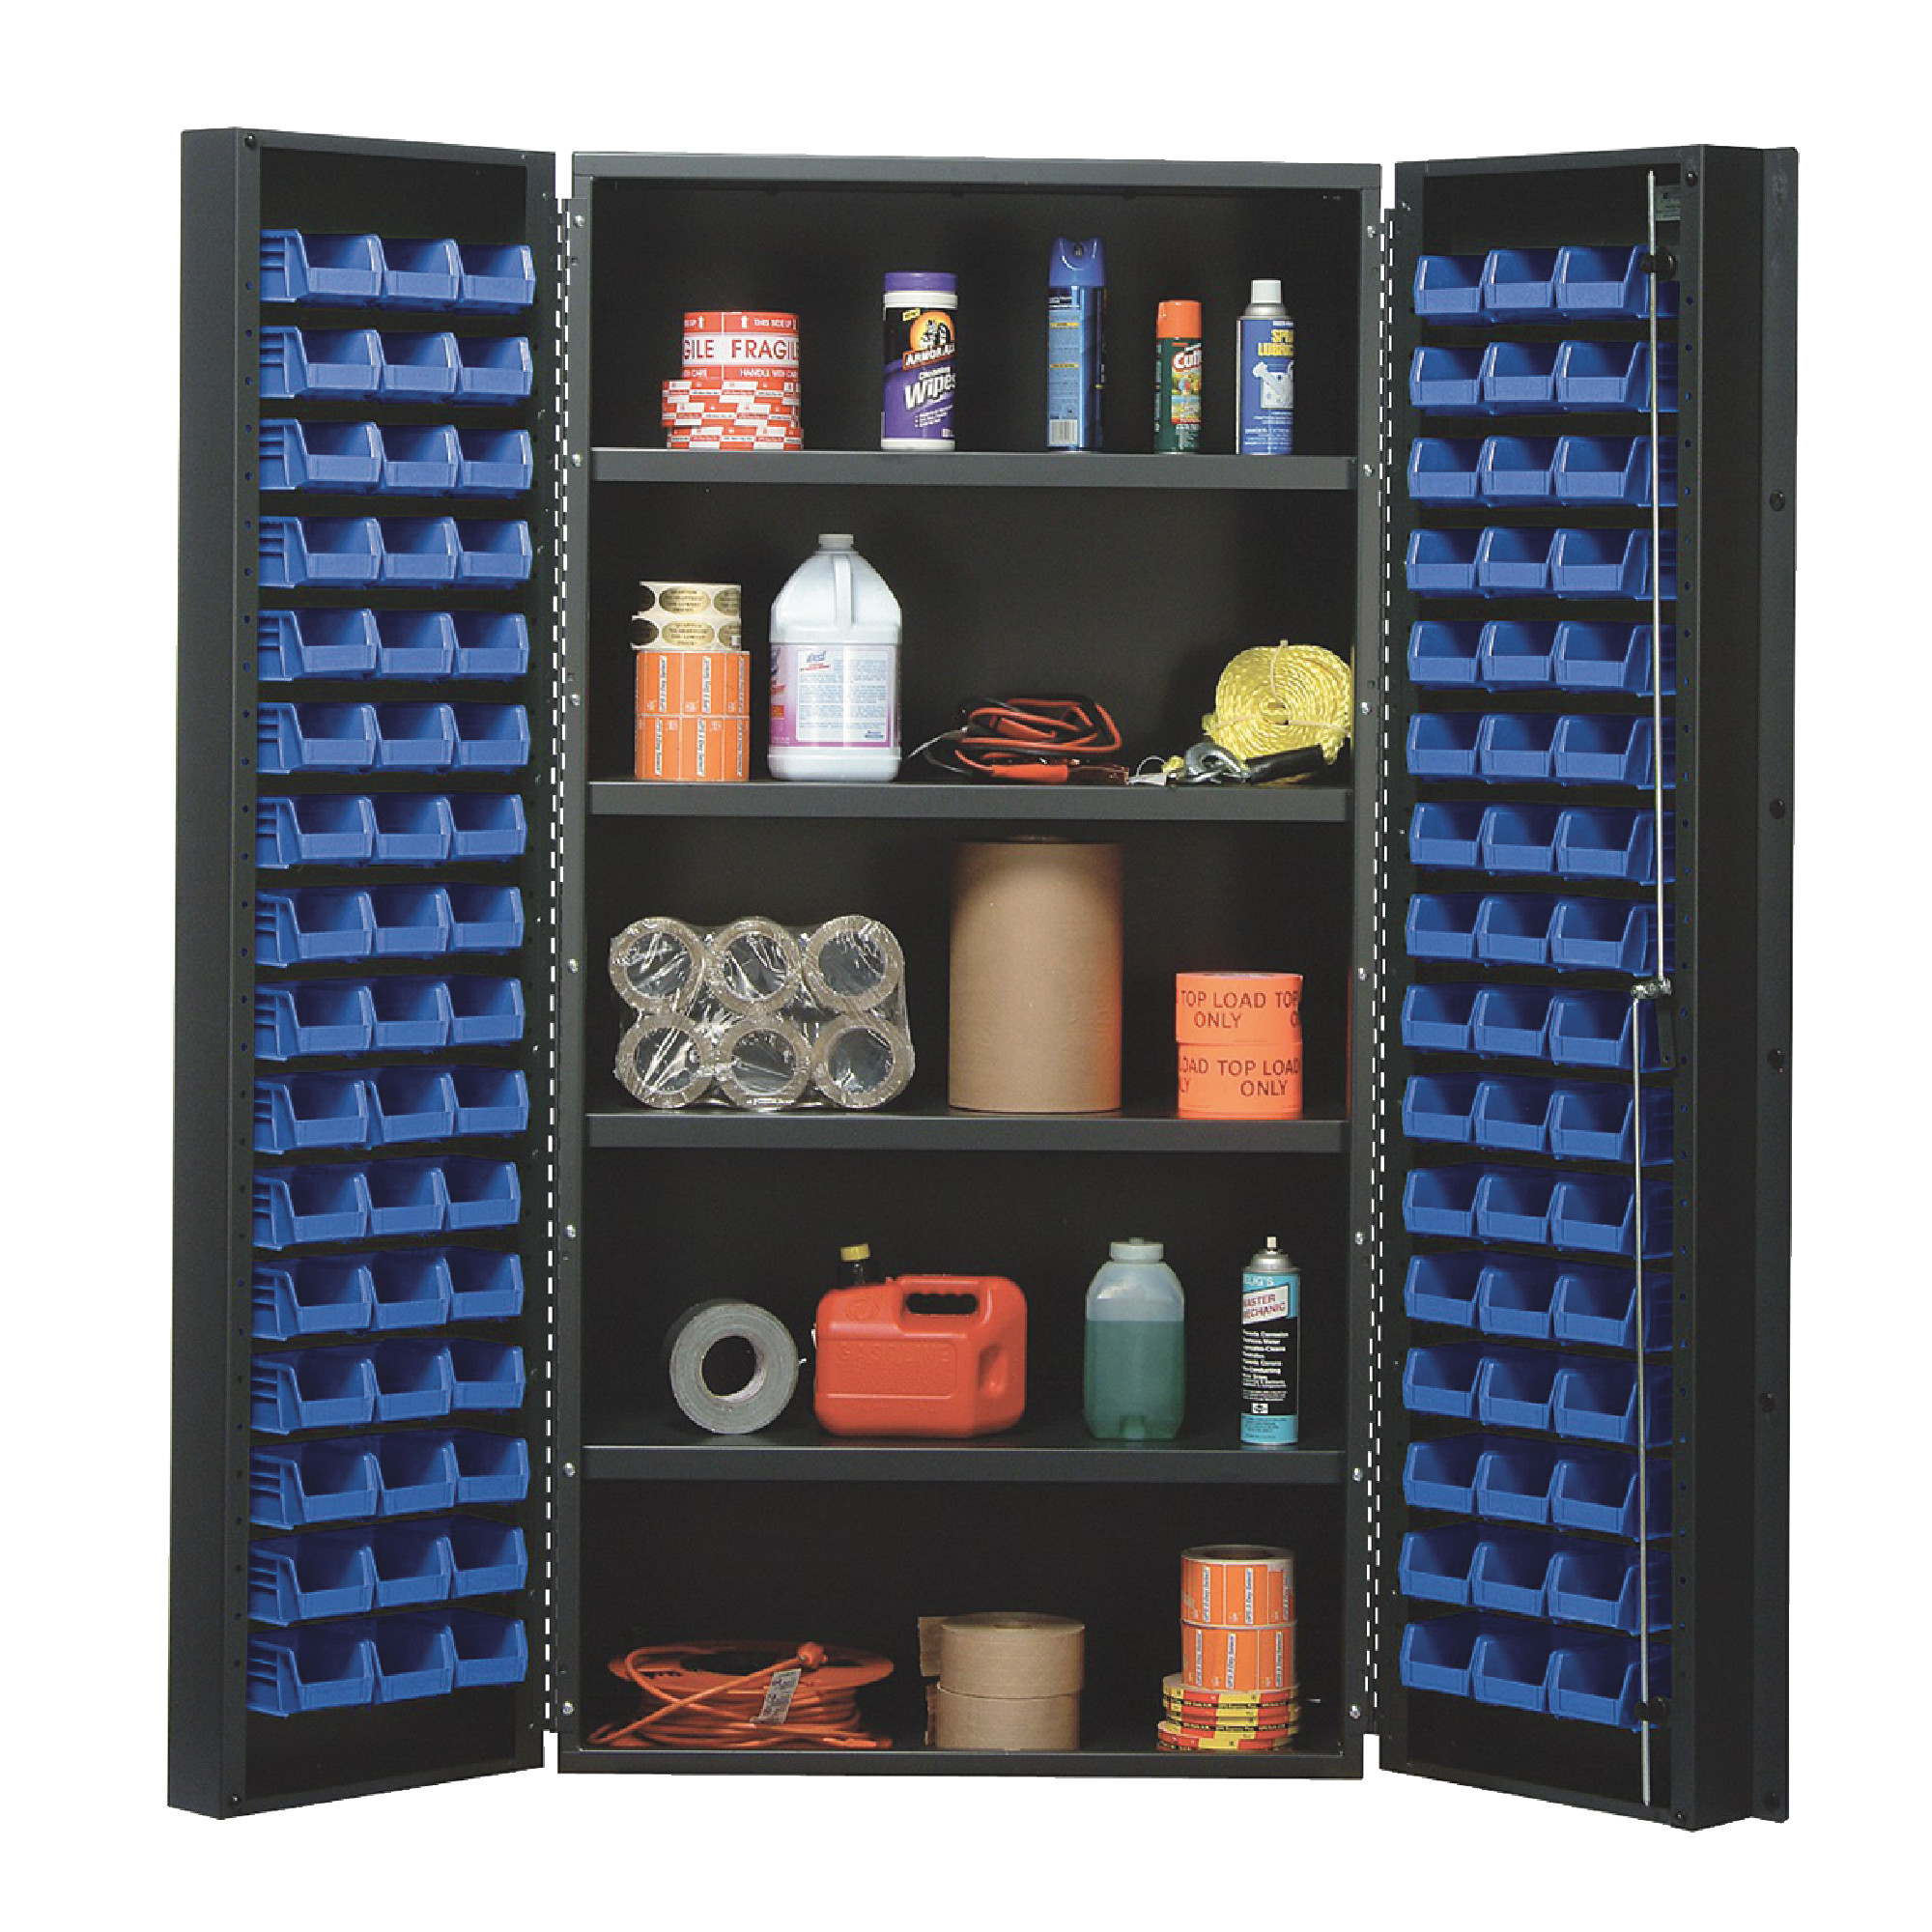 QUANTUM STORAGE SYSTEMS 36" Wide All Welded Floor Cabinet With 96 Blue Bins